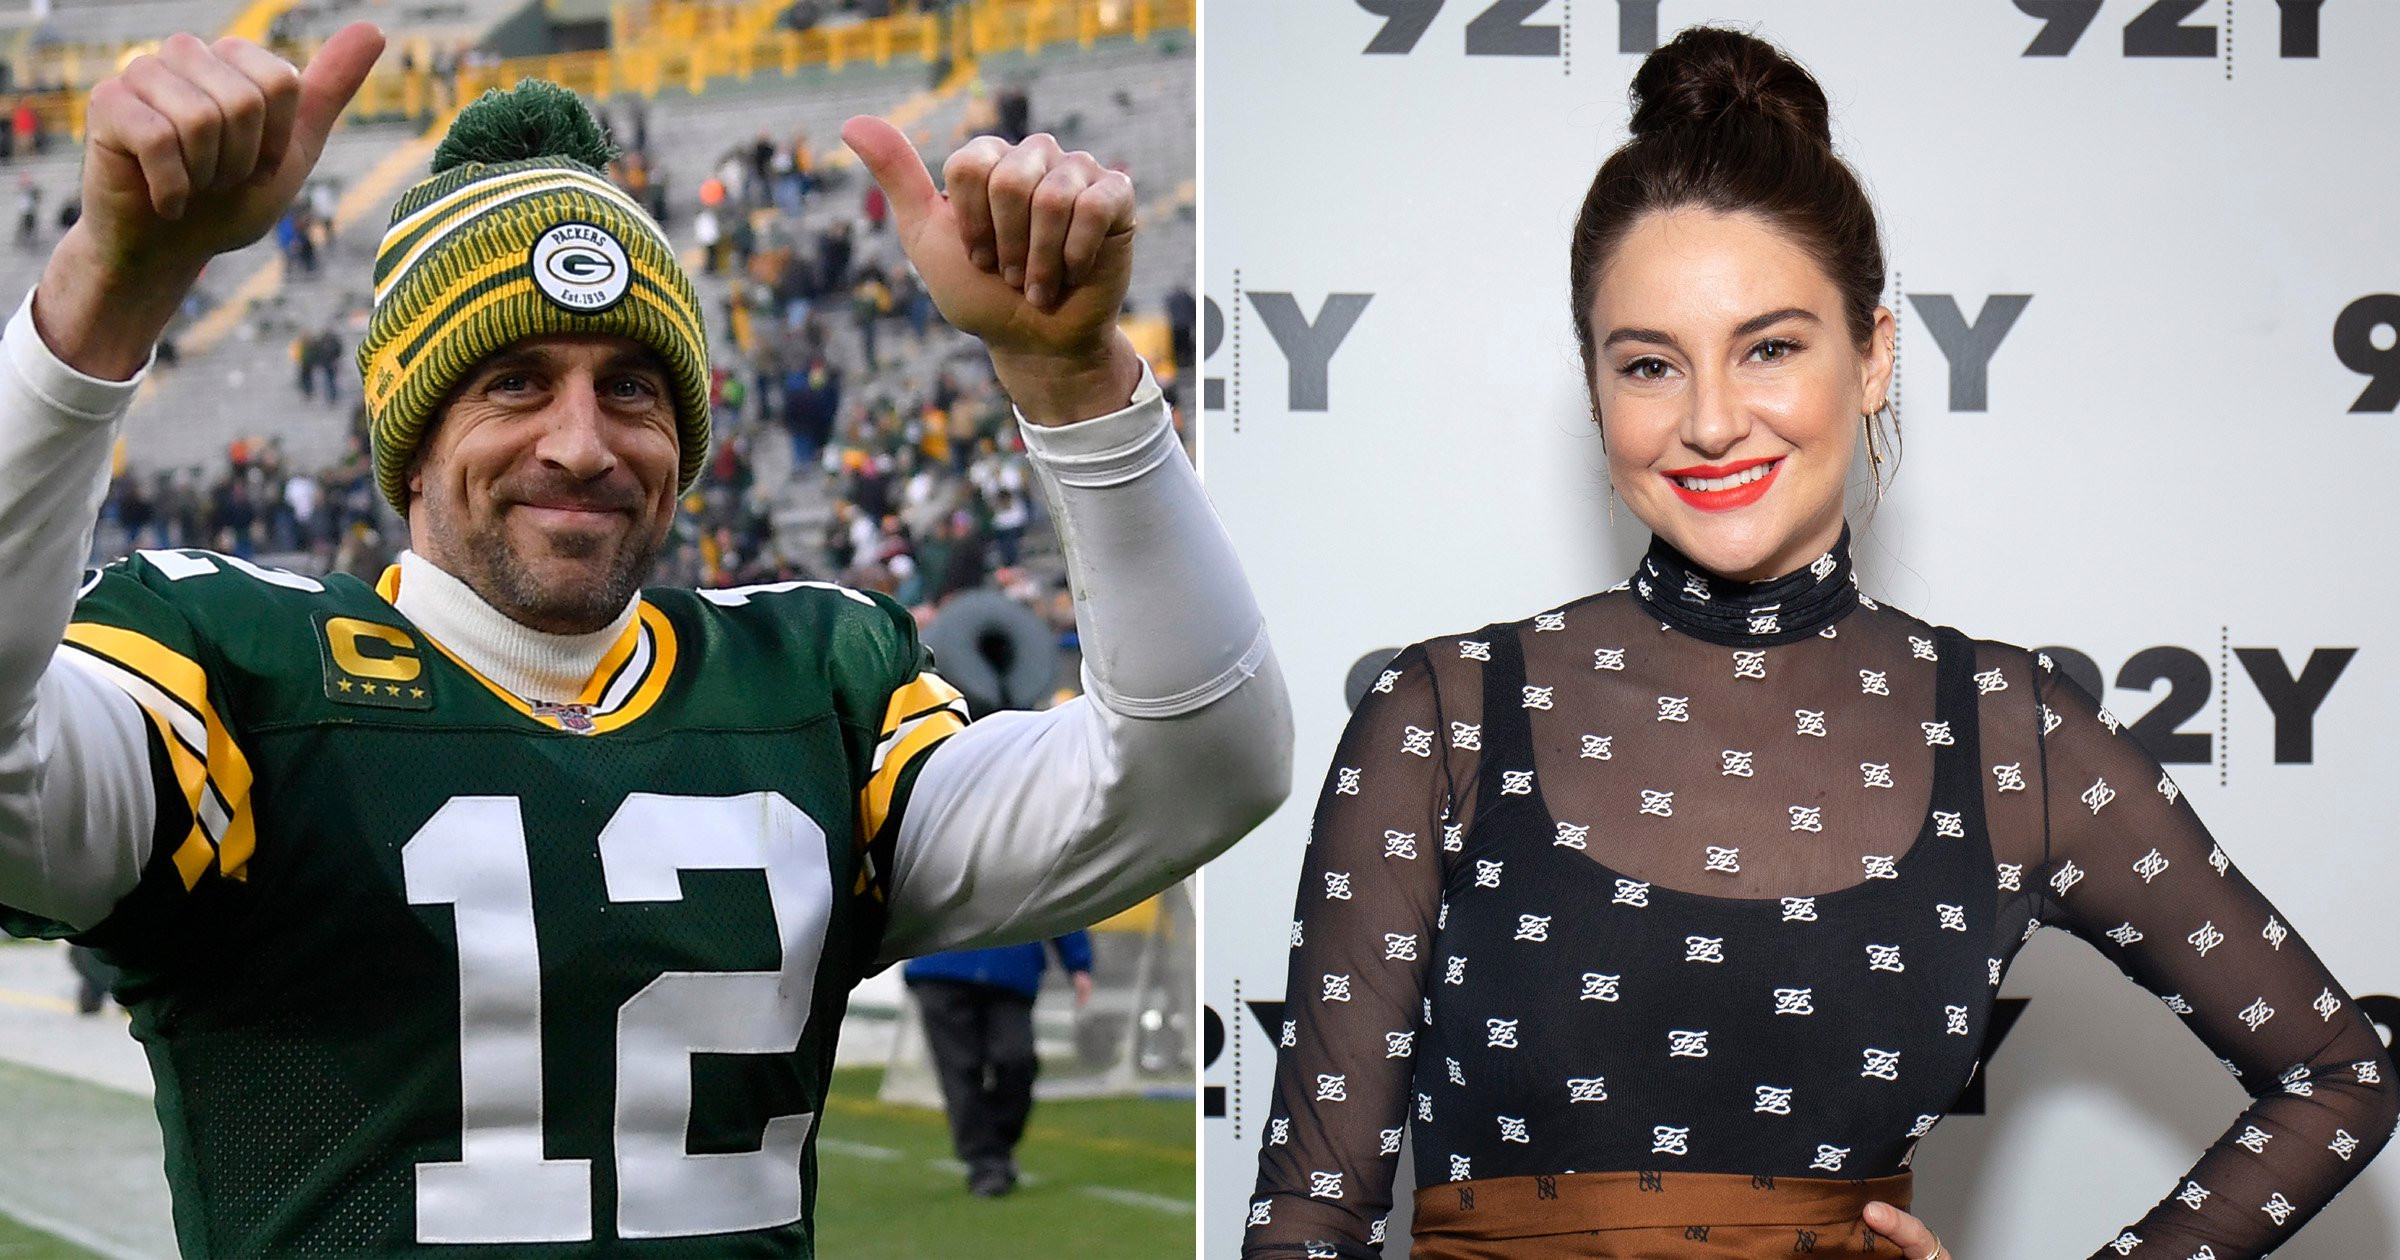 Shailene Woodley ‘dating NFL superstar Aaron Rodgers’: ‘They see each other when they can’